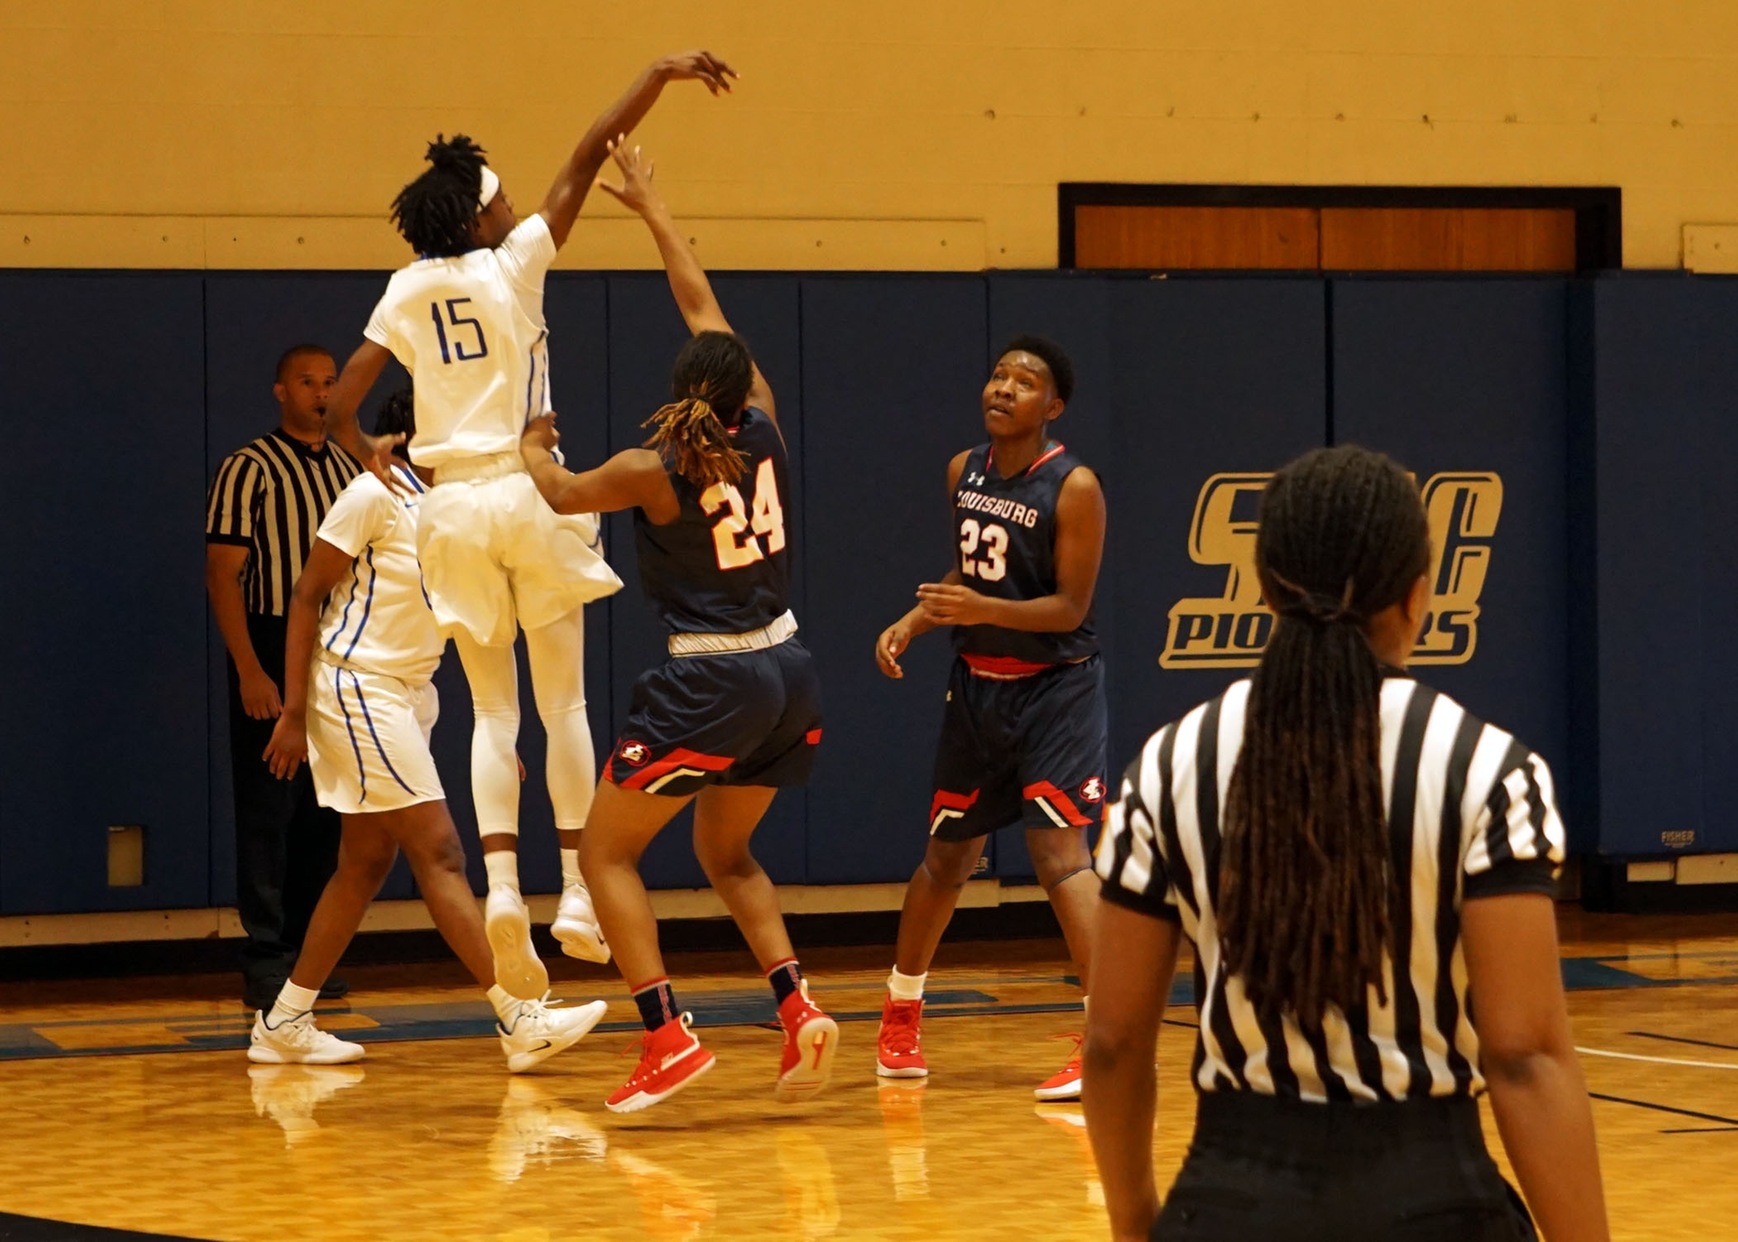 Lady Pioneers Fall to Louisburg 89-77